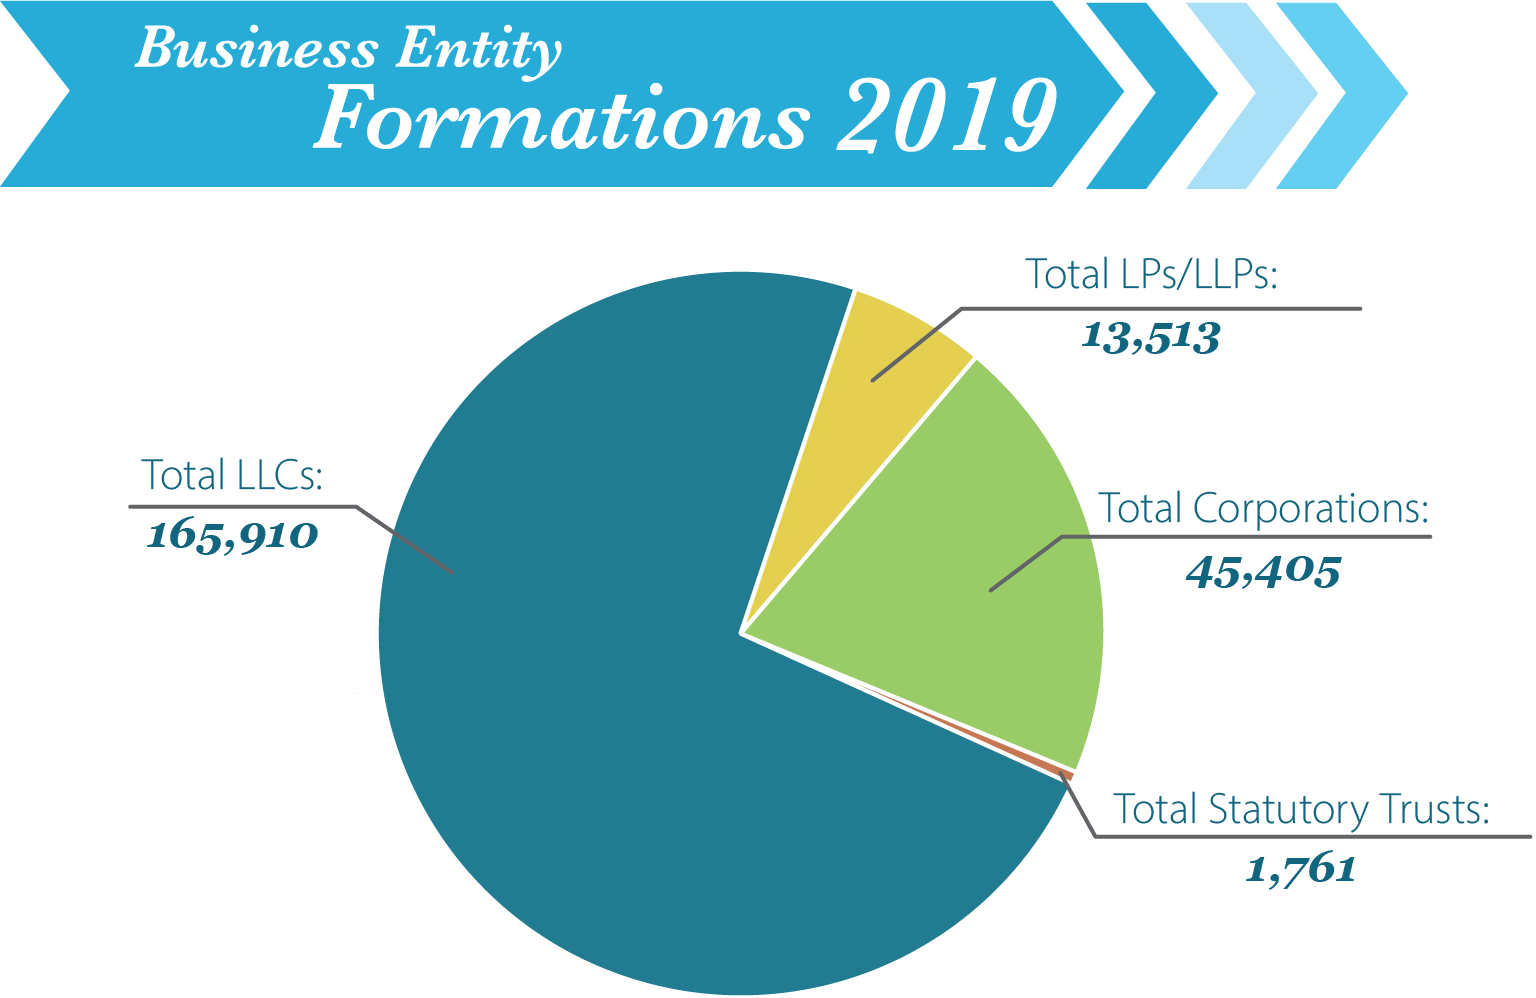 Image of Business Entity Formation for year 2019